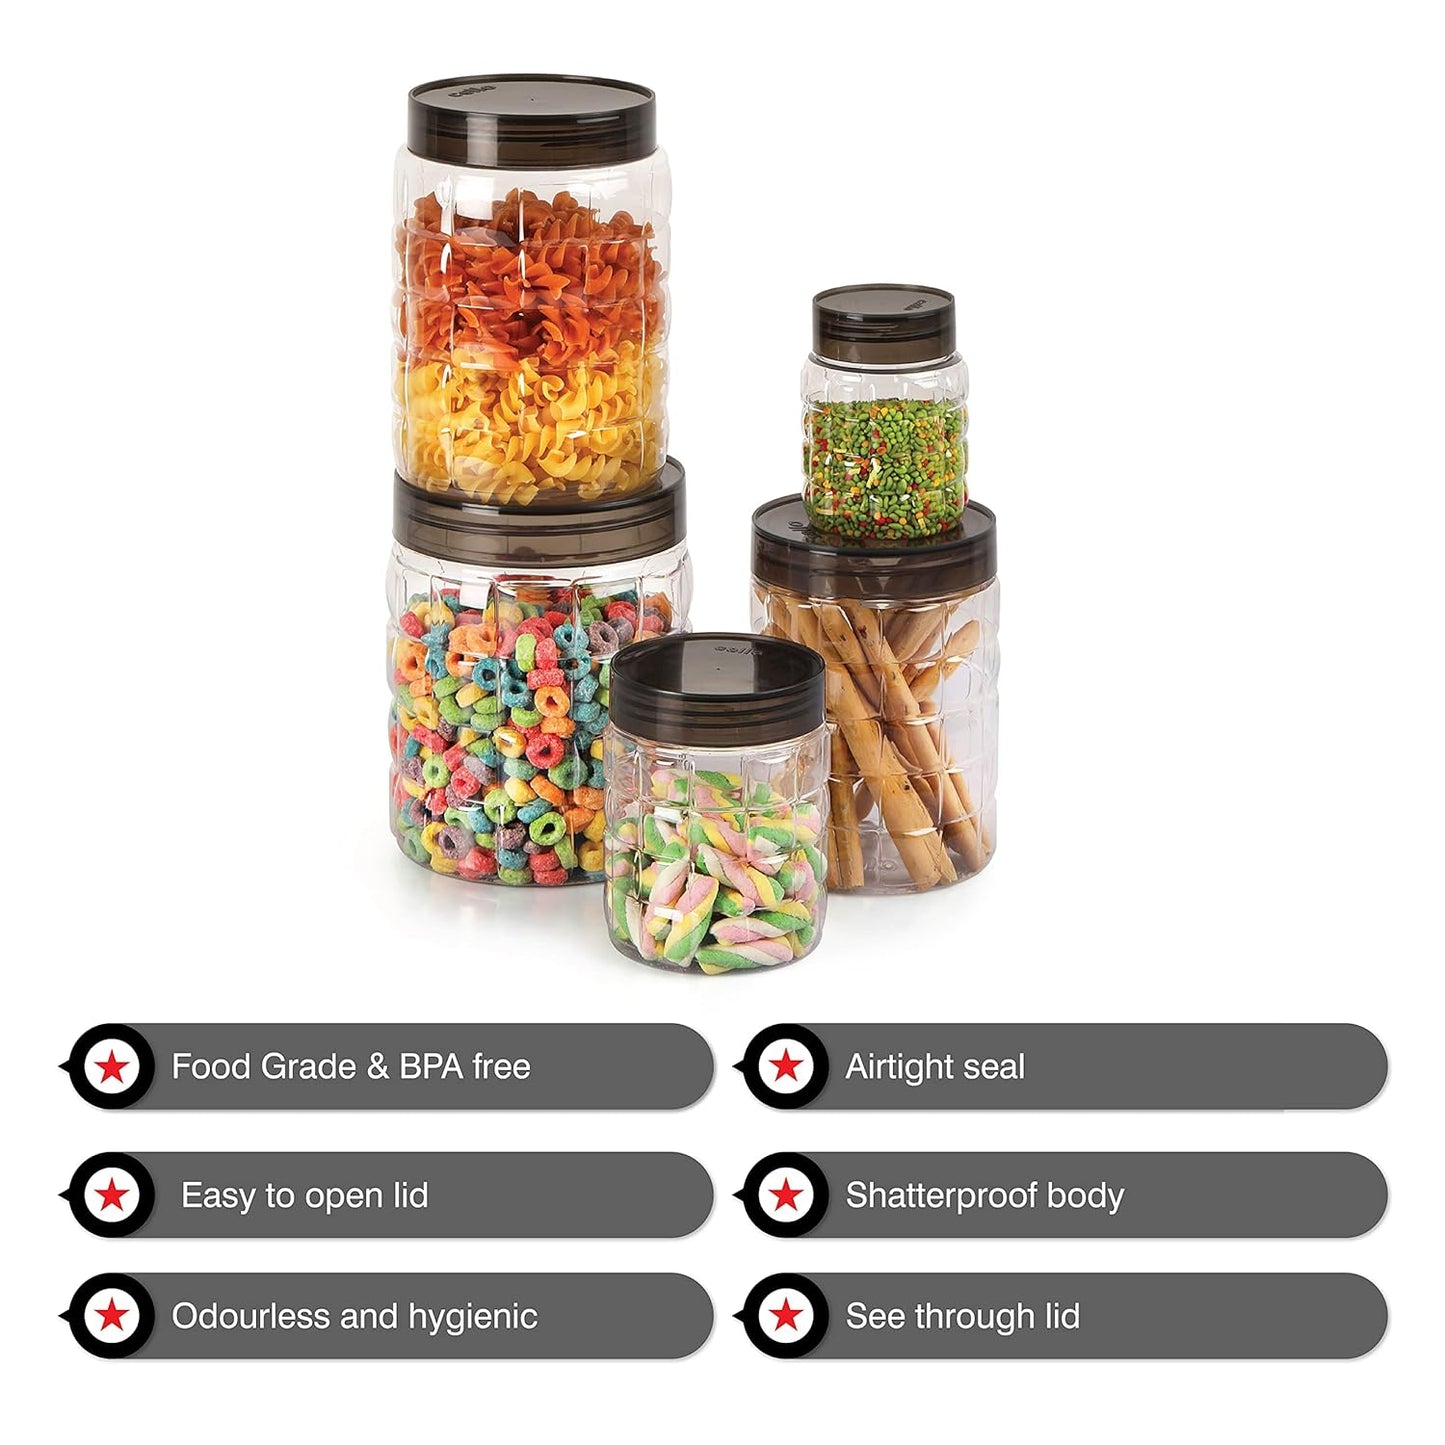 CELLO Checkers Pet Plastic Airtight Canister Set | Food grade and BPA free canisters | Air tight seal & Stackable Transparent | 300ml x 6, 650ml x 6, 1200 x 6, Set of 18